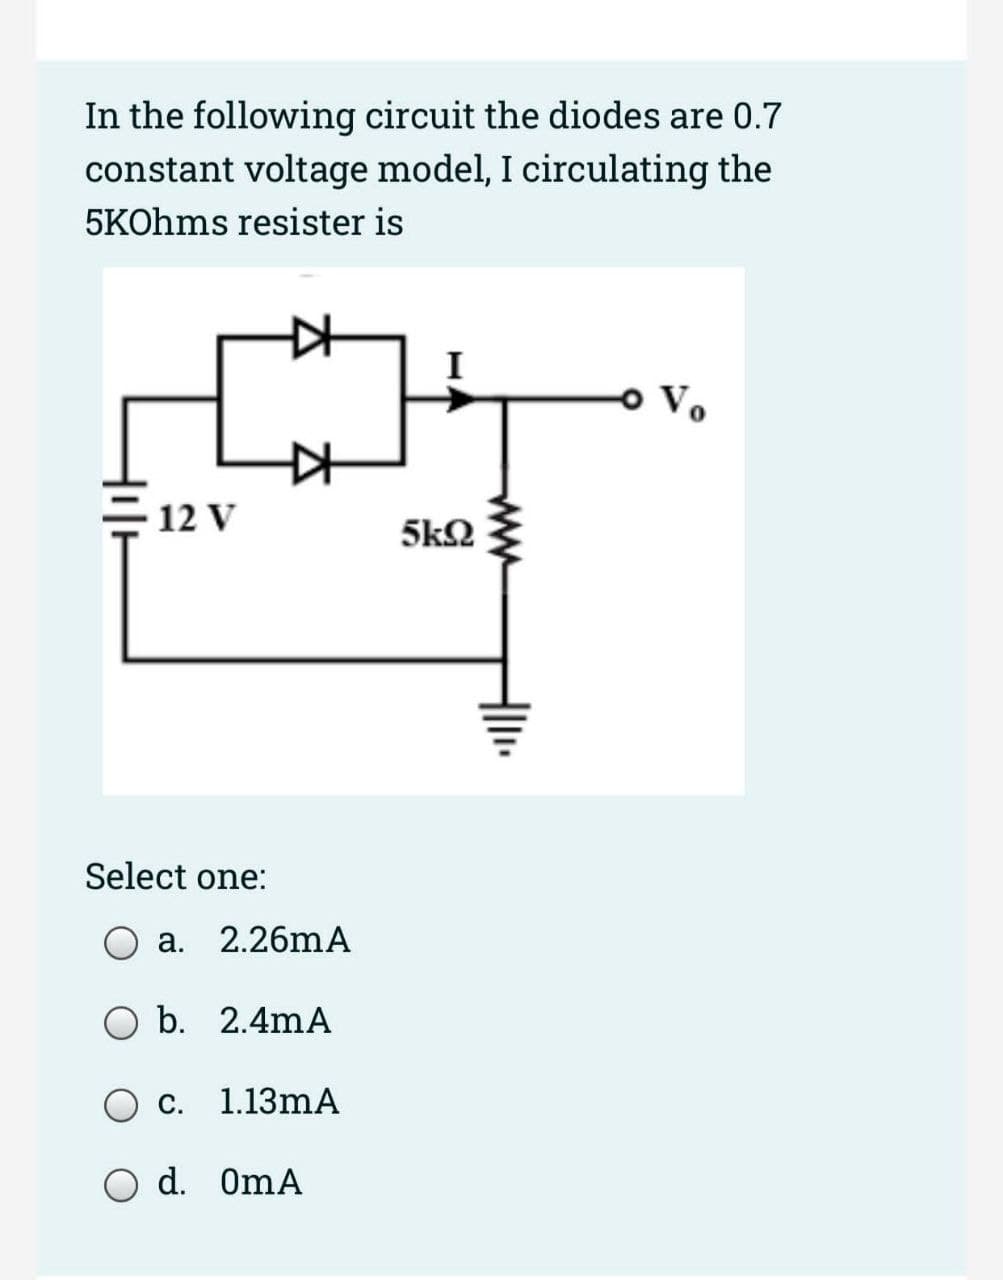 In the following circuit the diodes are 0.7
constant voltage model, I circulating the
5KOhms resister is
마
12 V
Select one:
O a.
O b.
C.
2.26mA
2.4mA
1.13mA
O d. 0mA
5kQ